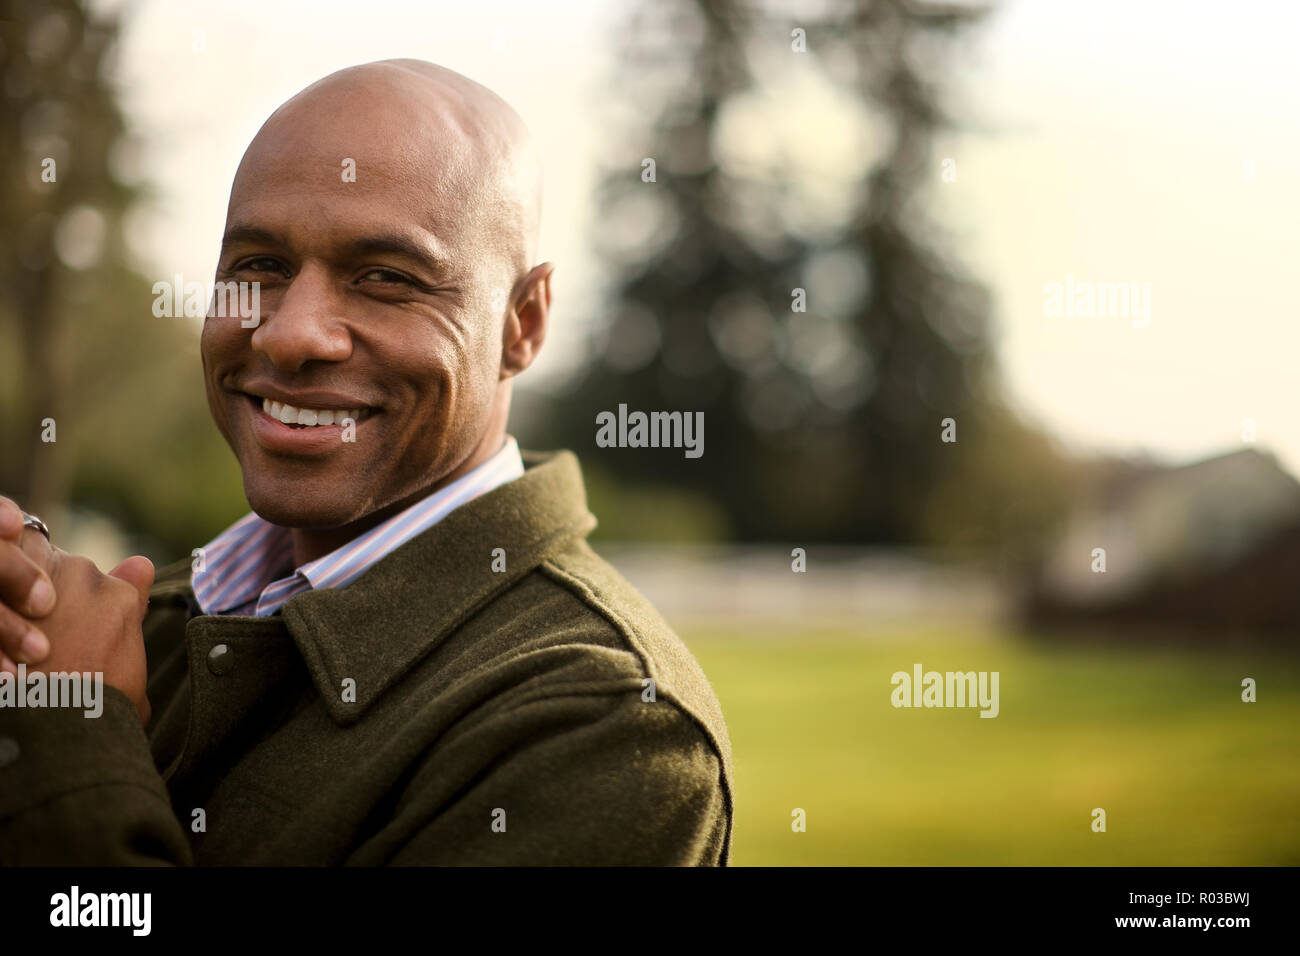 Portrait of a smiling mid adult man. Stock Photo